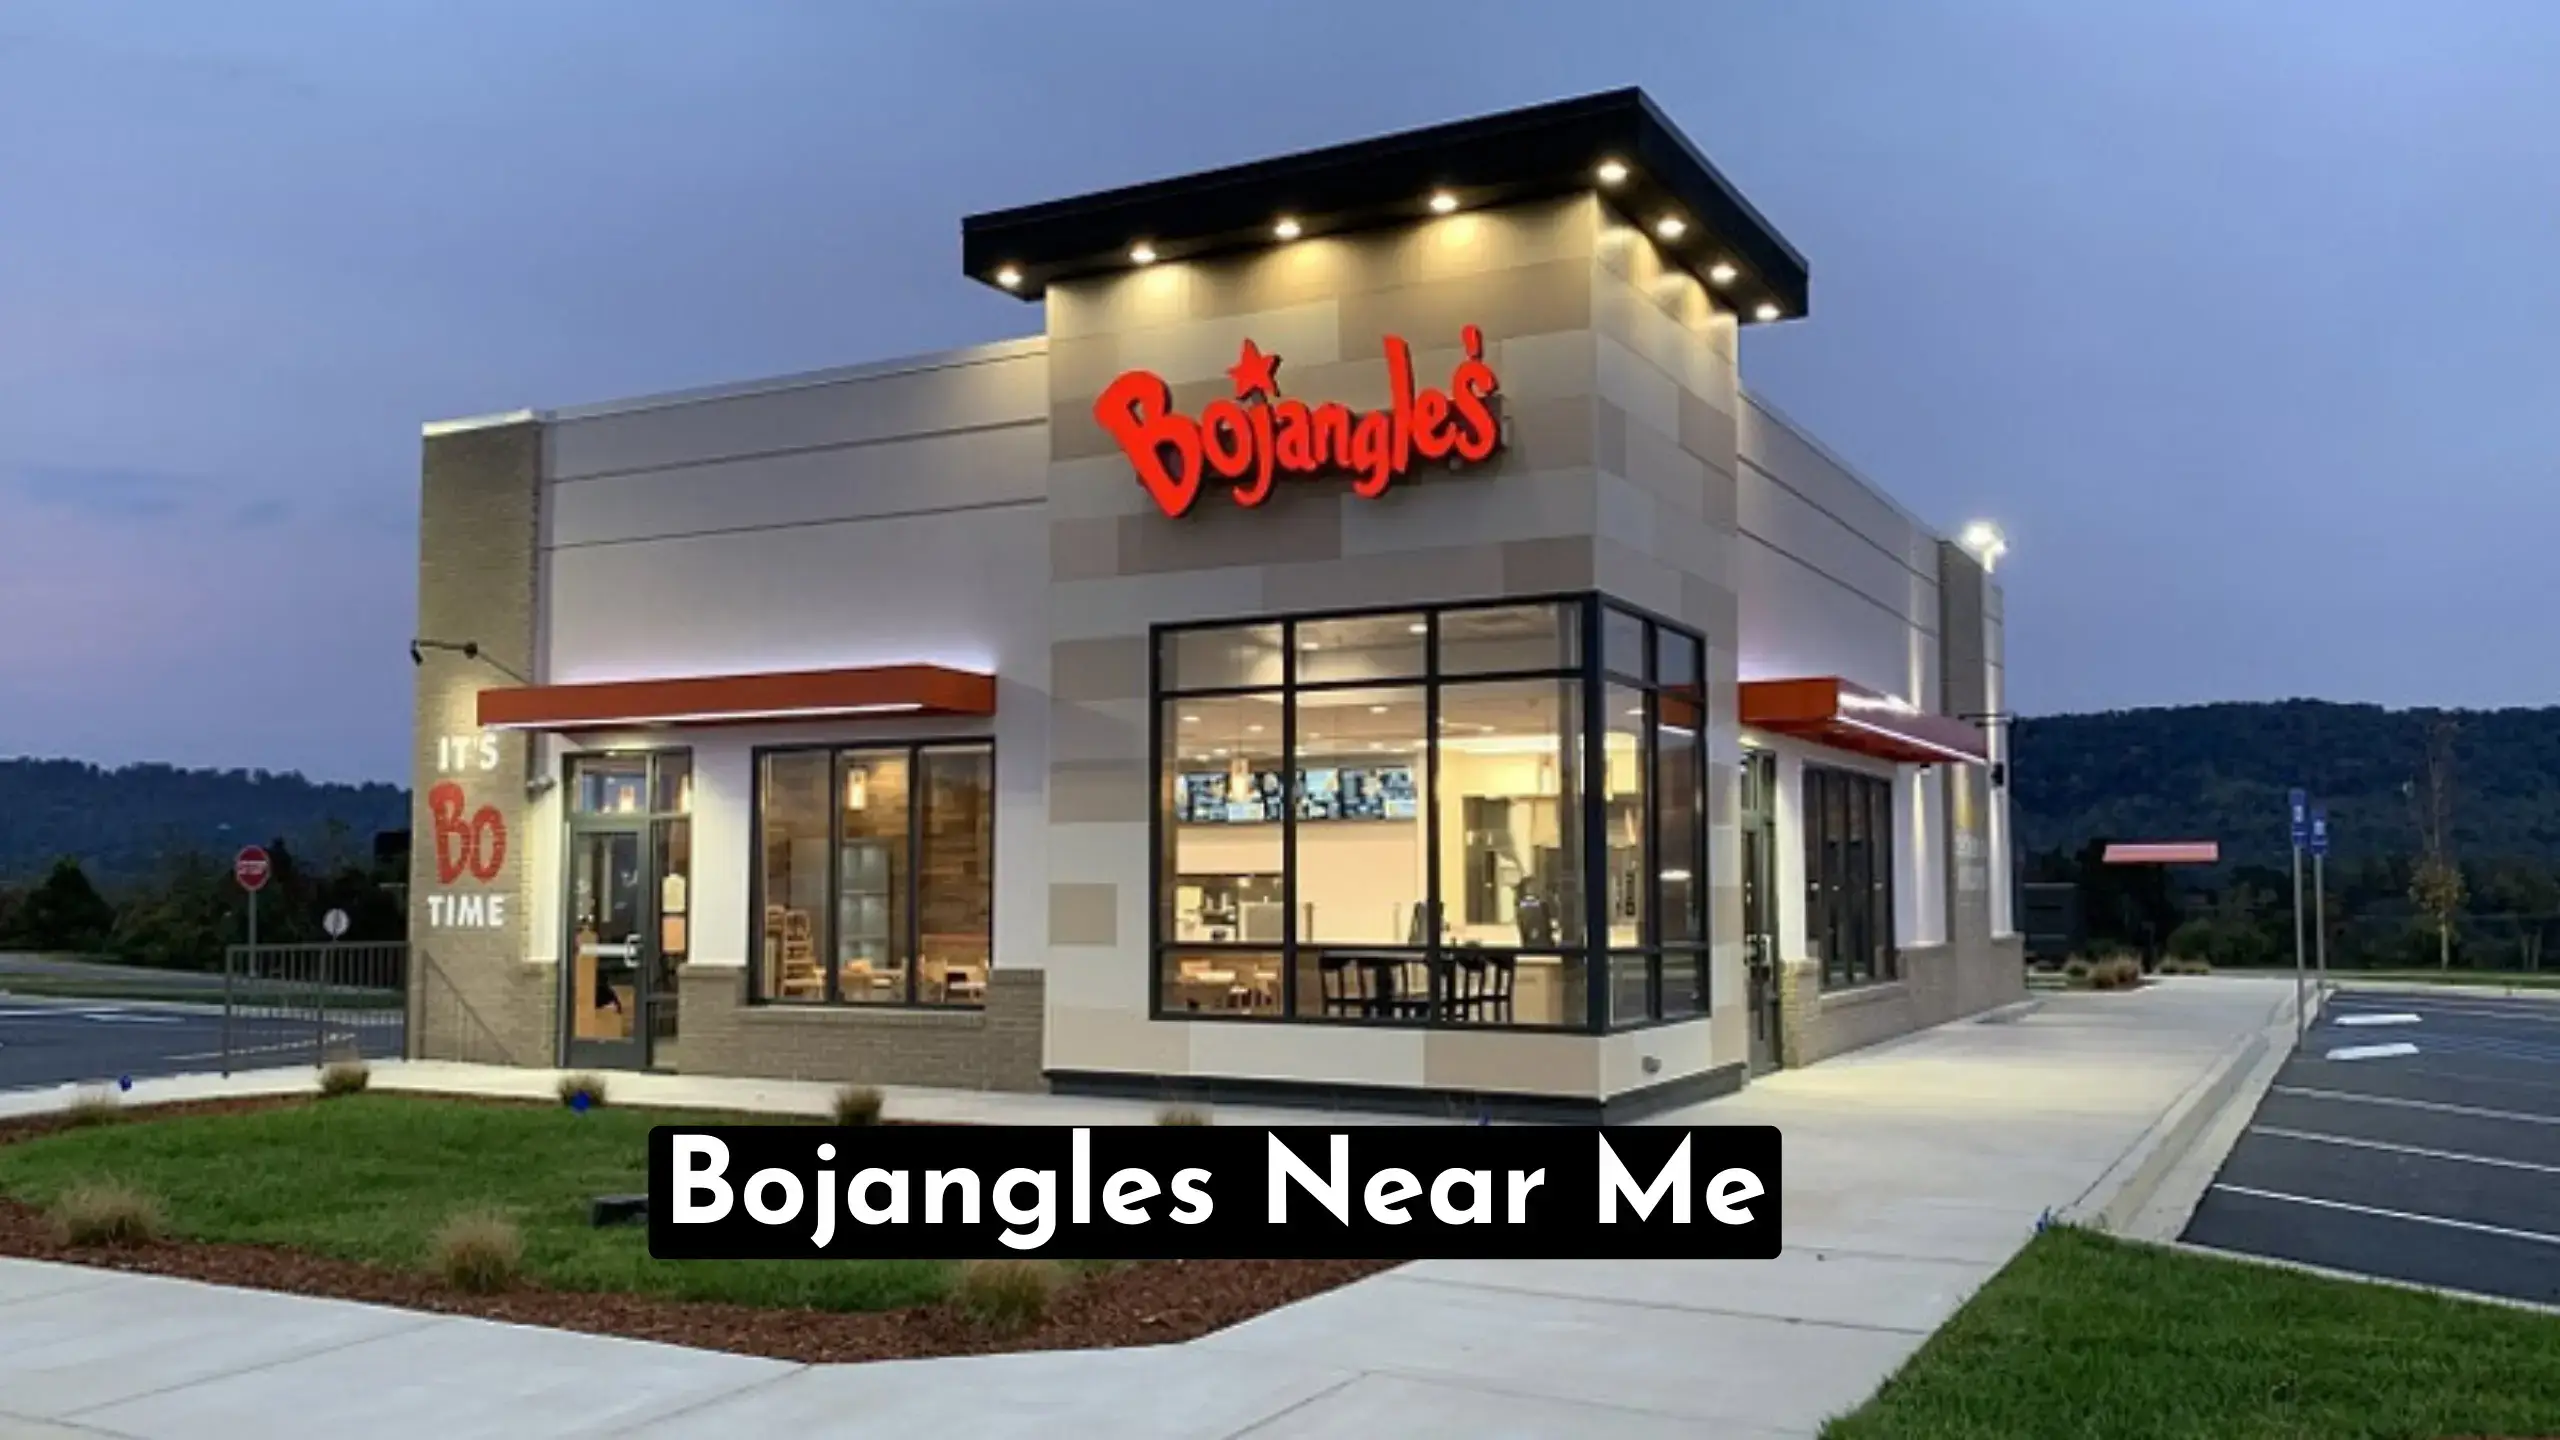 Looking for delicious Southern-style fast food? Search no more! Check out the nearest Bojangles Near Me & enjoy mouthwatering chicken & Sides